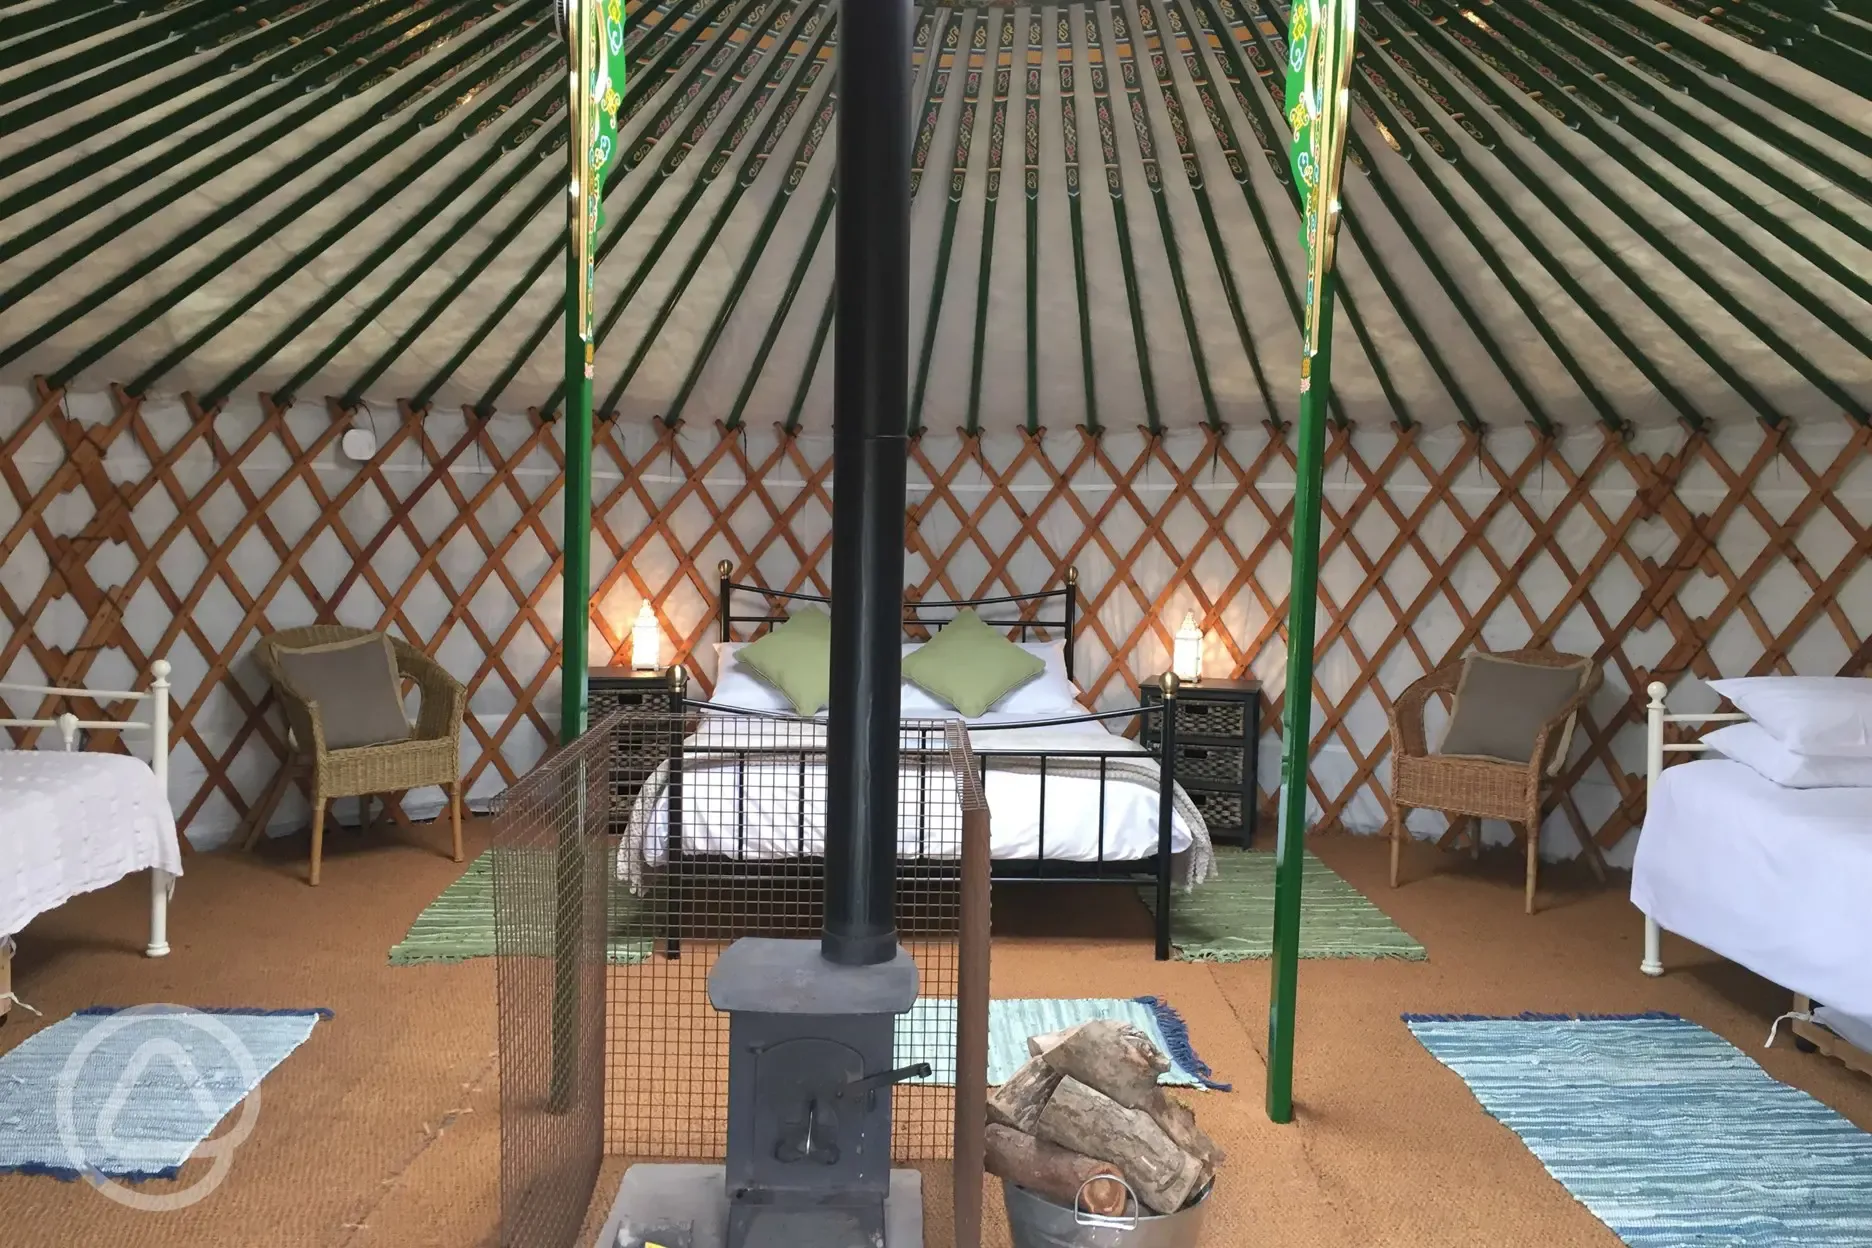 Our Yurts are furnished with comfortable beds, electricity and a woodturning stove.